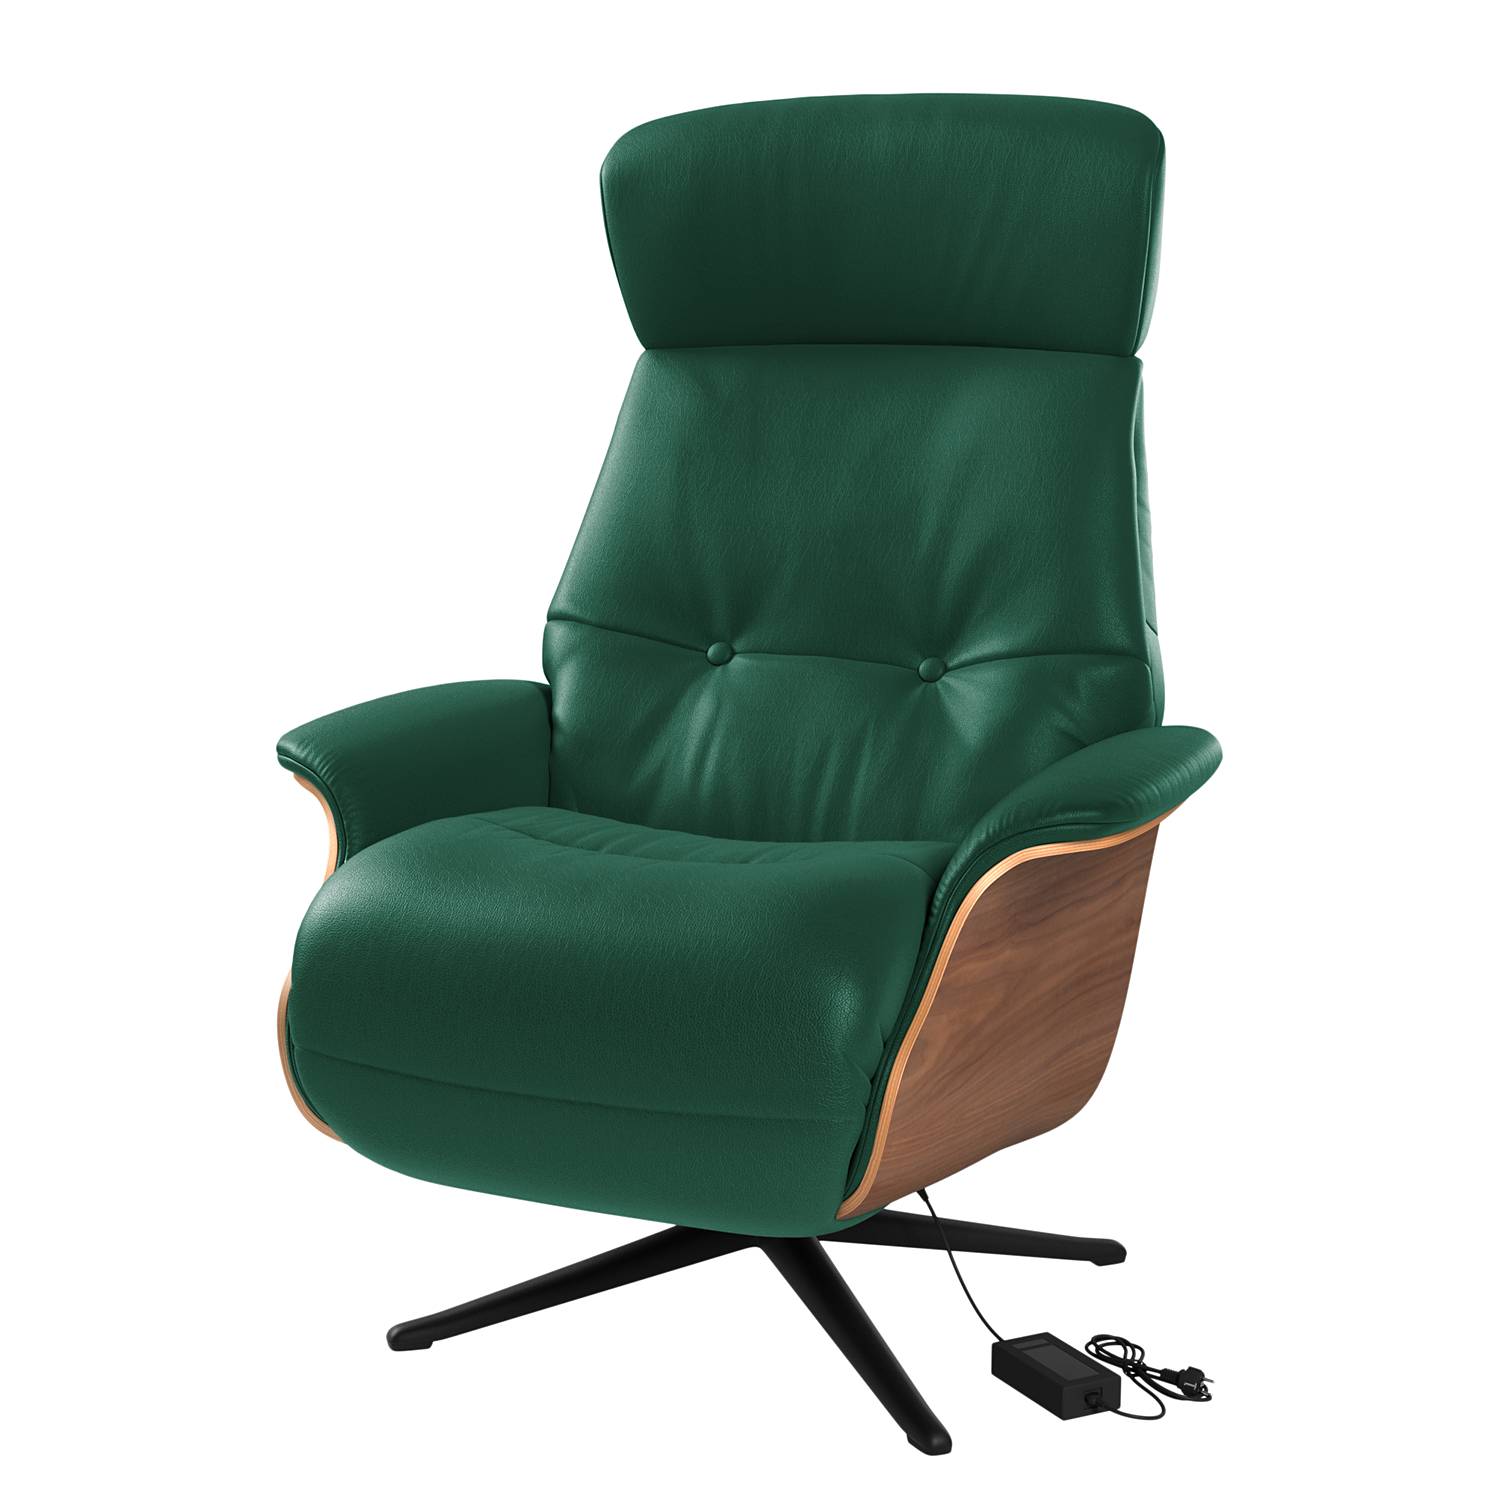 Image of Fauteuil relax Anderson VI 000000001000131399